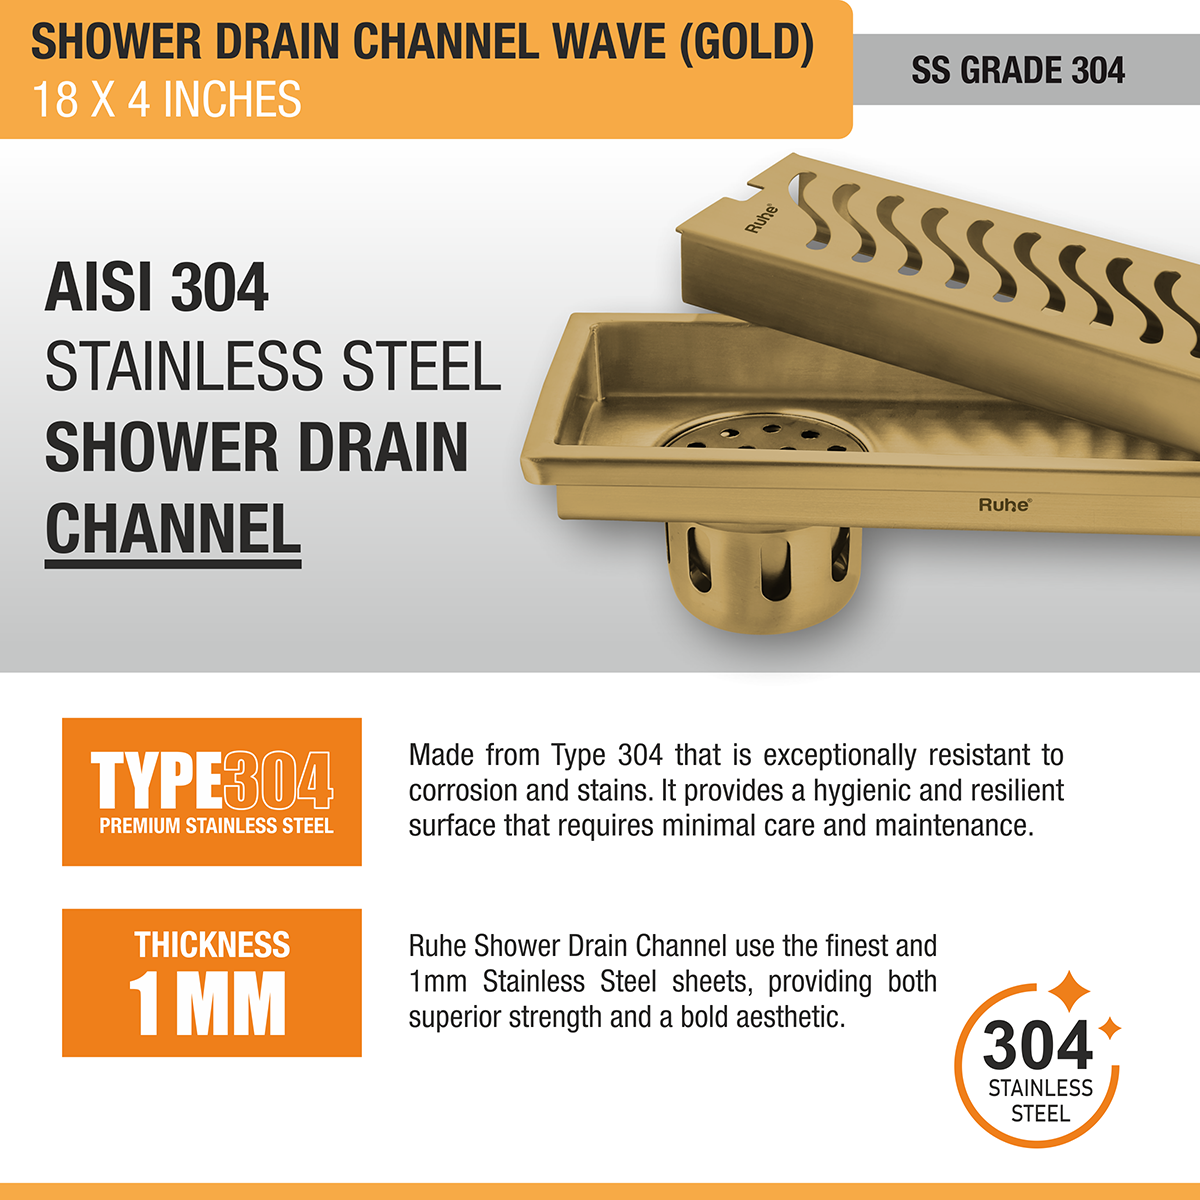 Wave Shower Drain Channel (18 x 4 Inches) YELLOW GOLD stainless steel